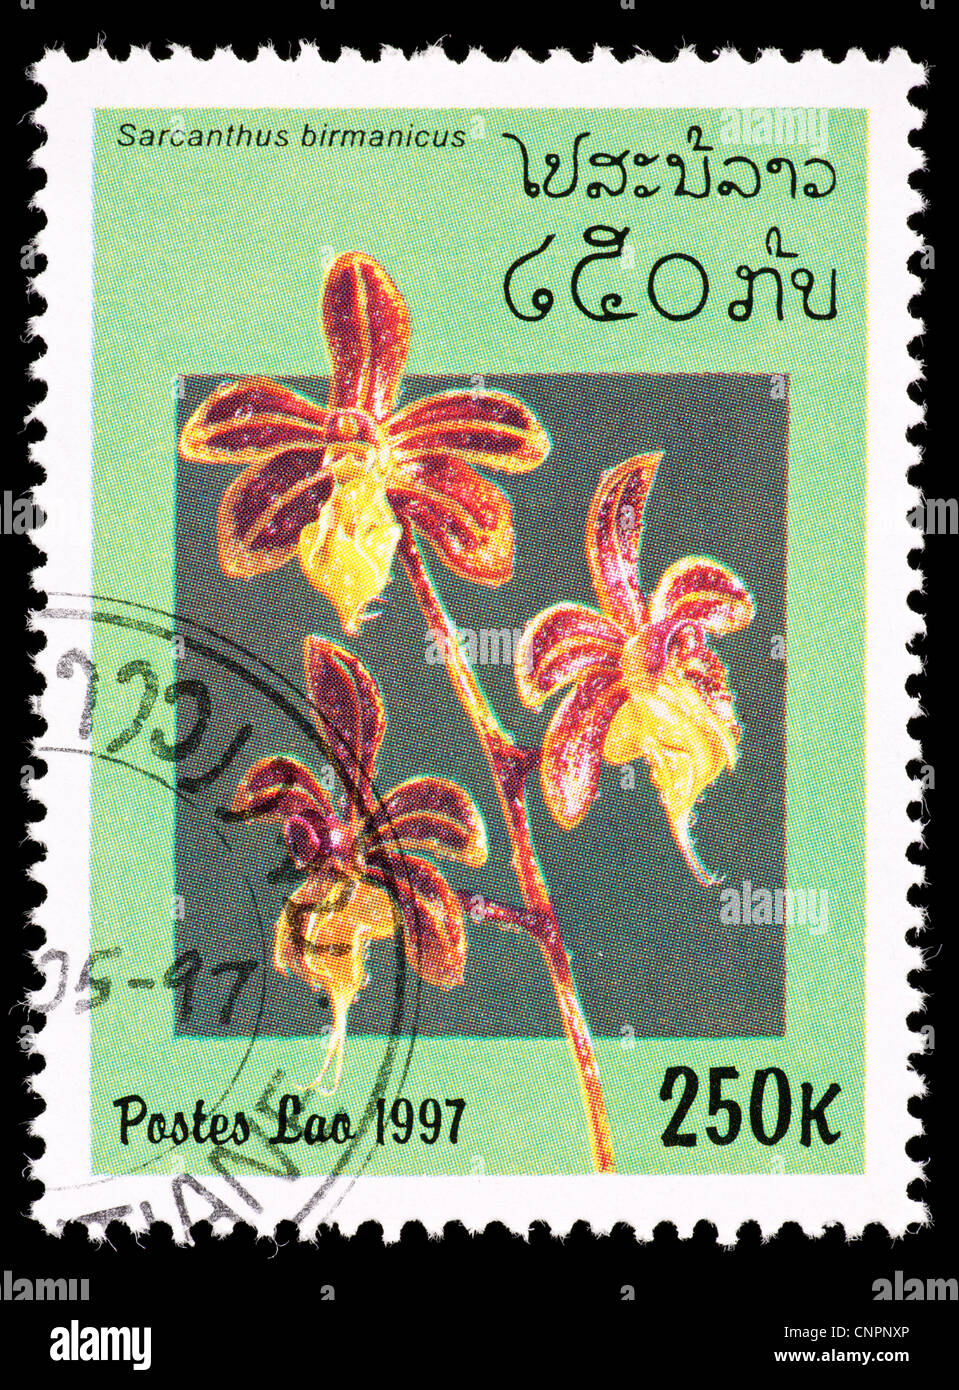 Postage stamp from Laos depicting an orchid flower (Sarcanthus birmanicus) Stock Photo